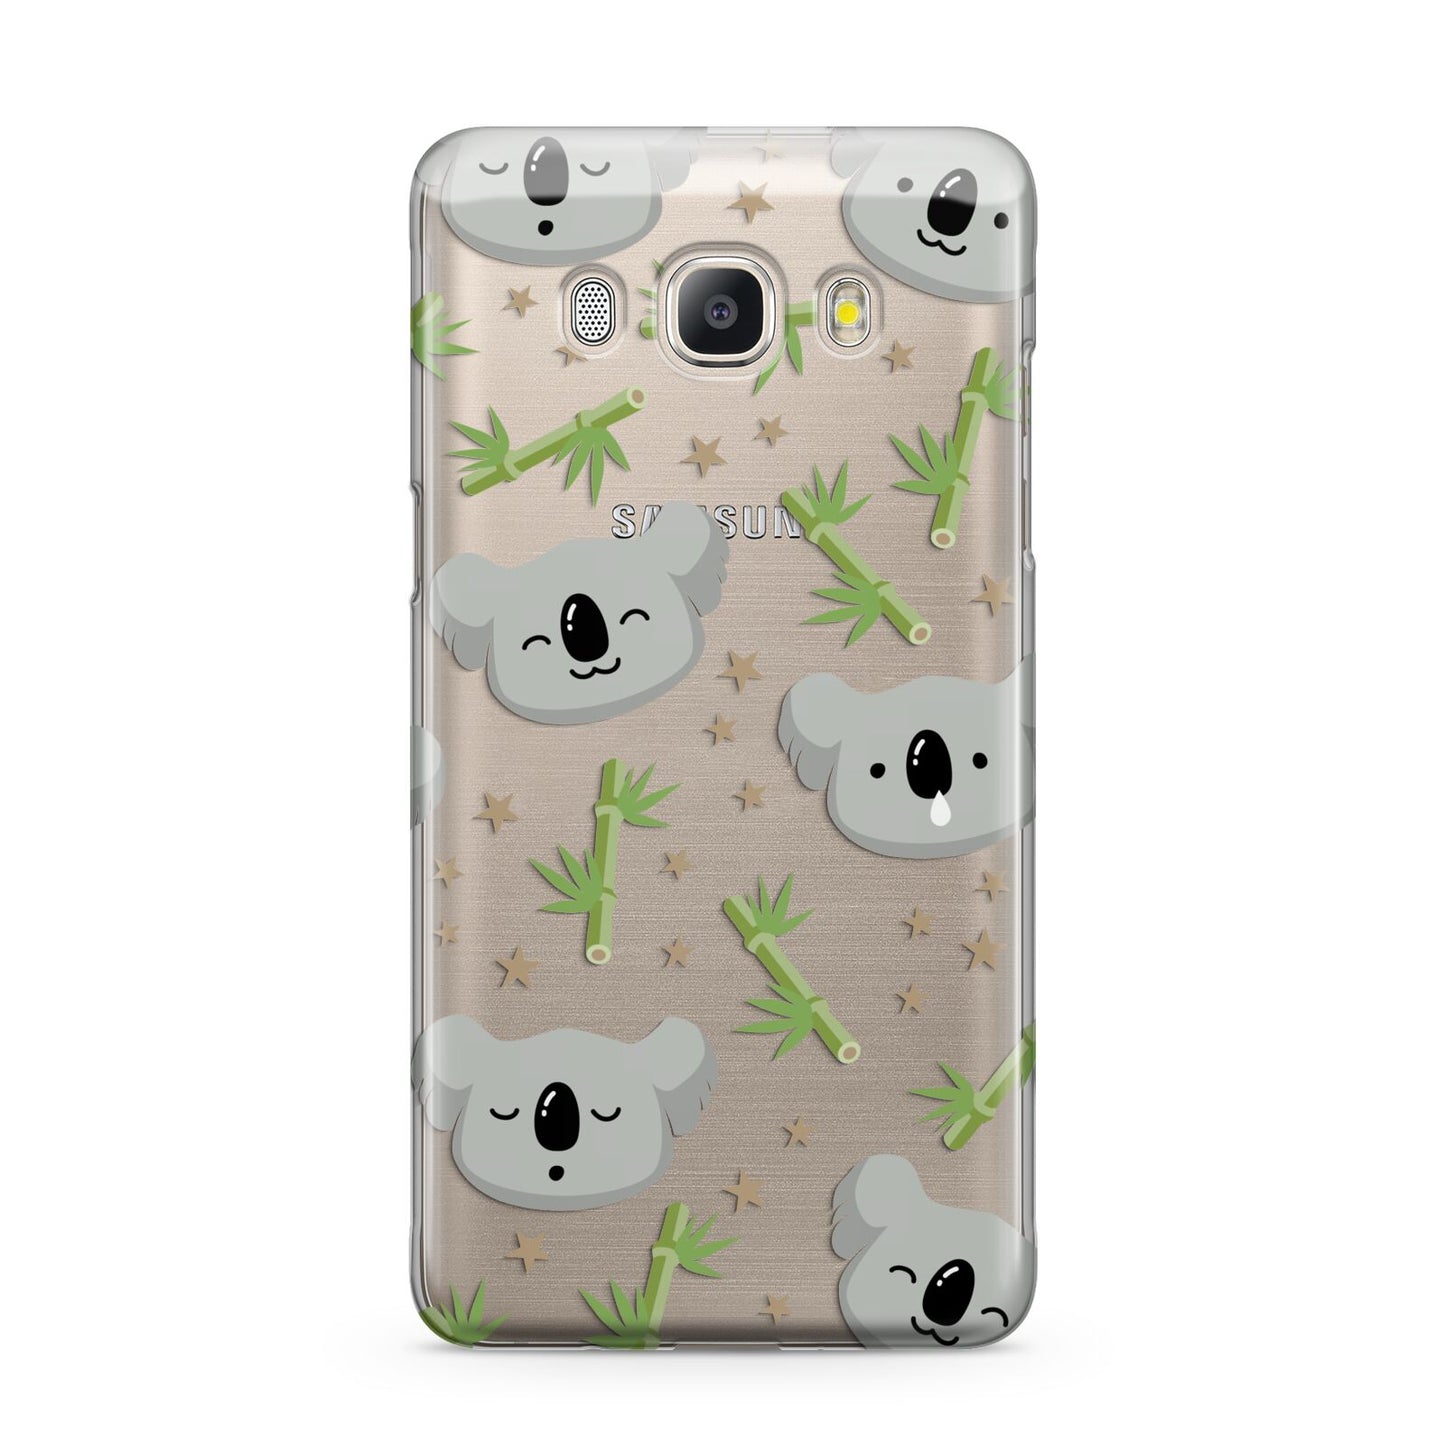 Koala Faces with Transparent Background Samsung Galaxy J5 2016 Case